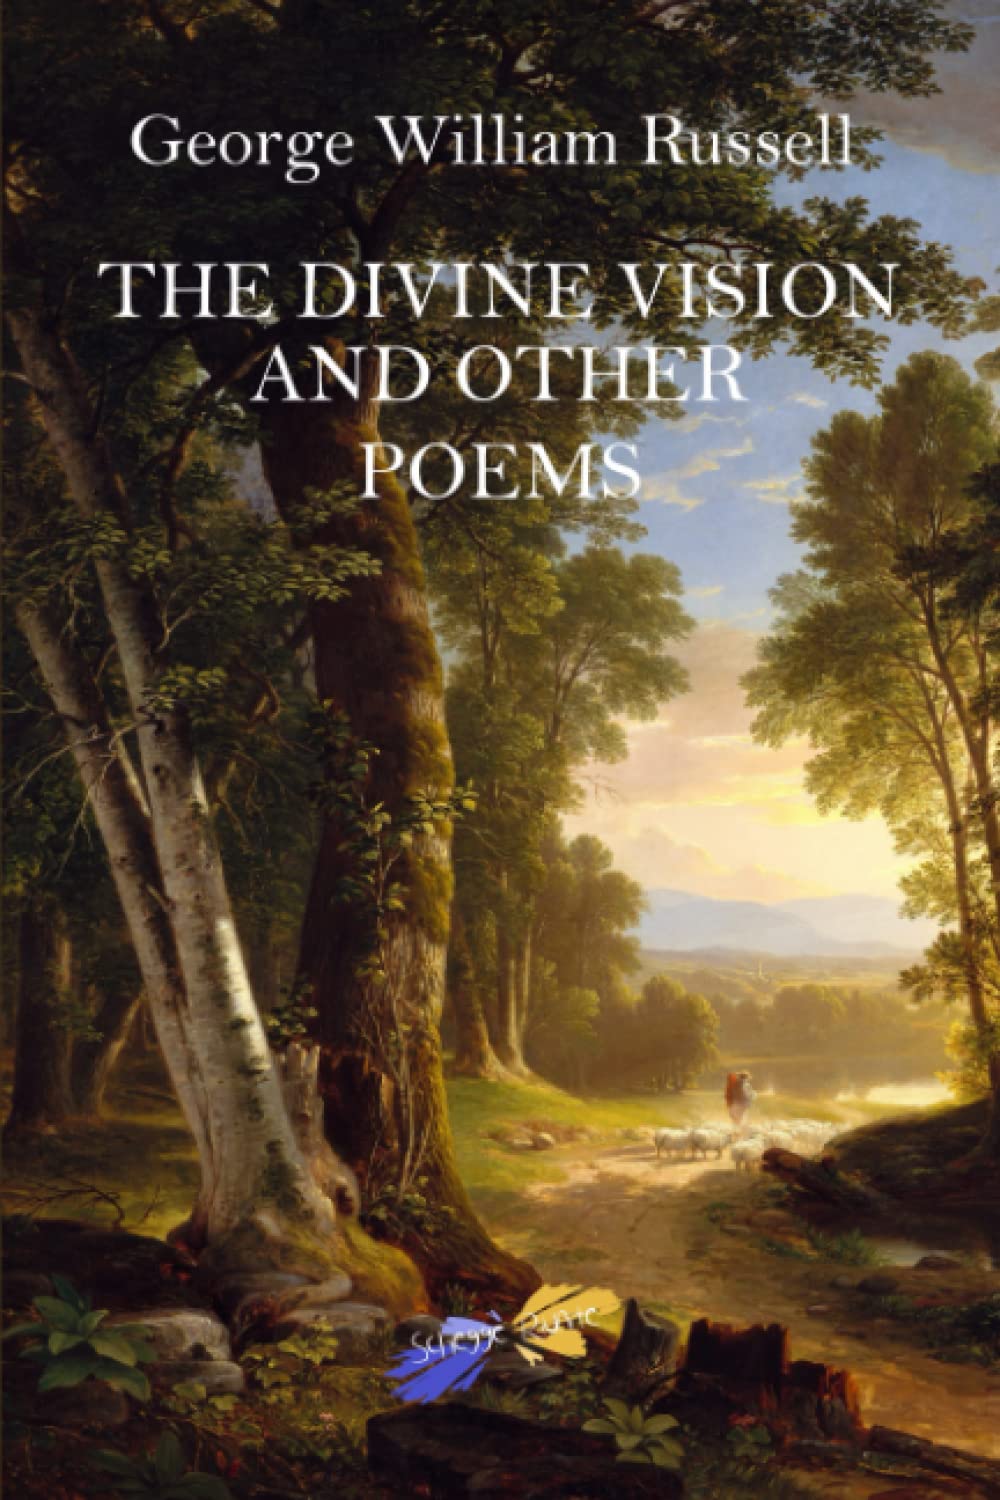 THE DIVINE VISION AND OTHER POEMS